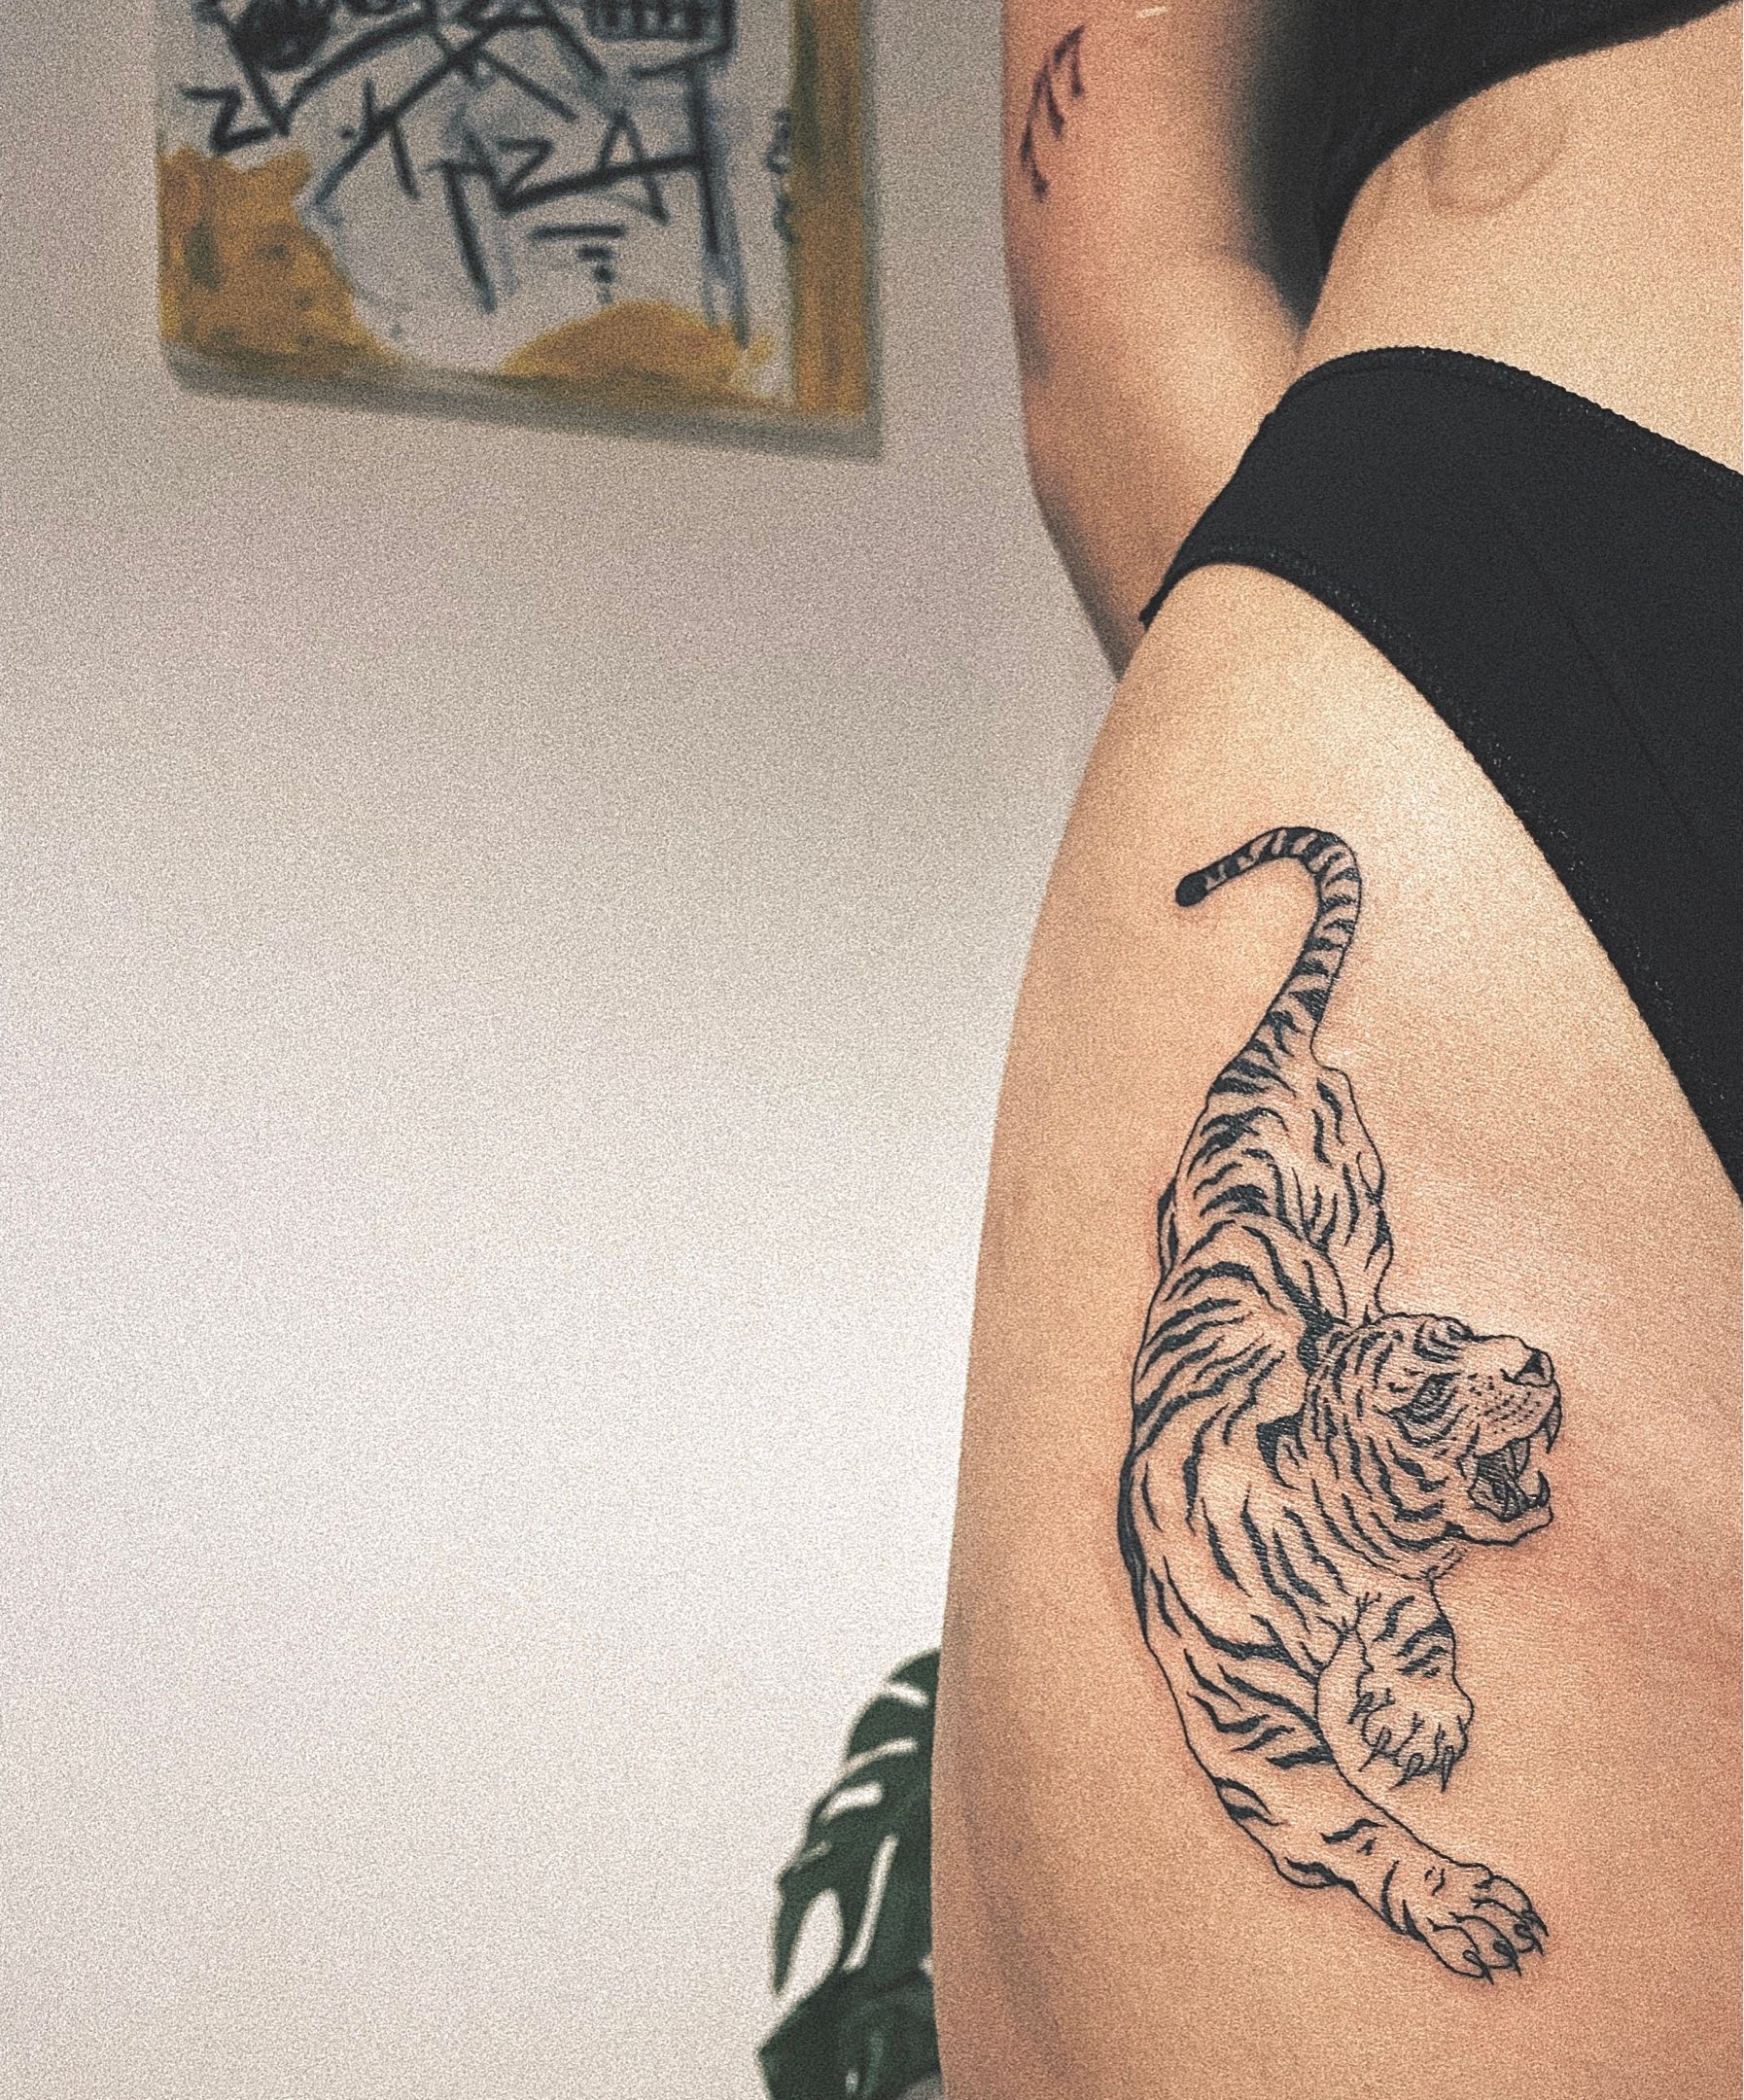 Poison IV Tattoo Parlour on Twitter Minimalist Tiger cub behind the  ear Done by Alessandro httpstco0XgbjKcYOm  Twitter